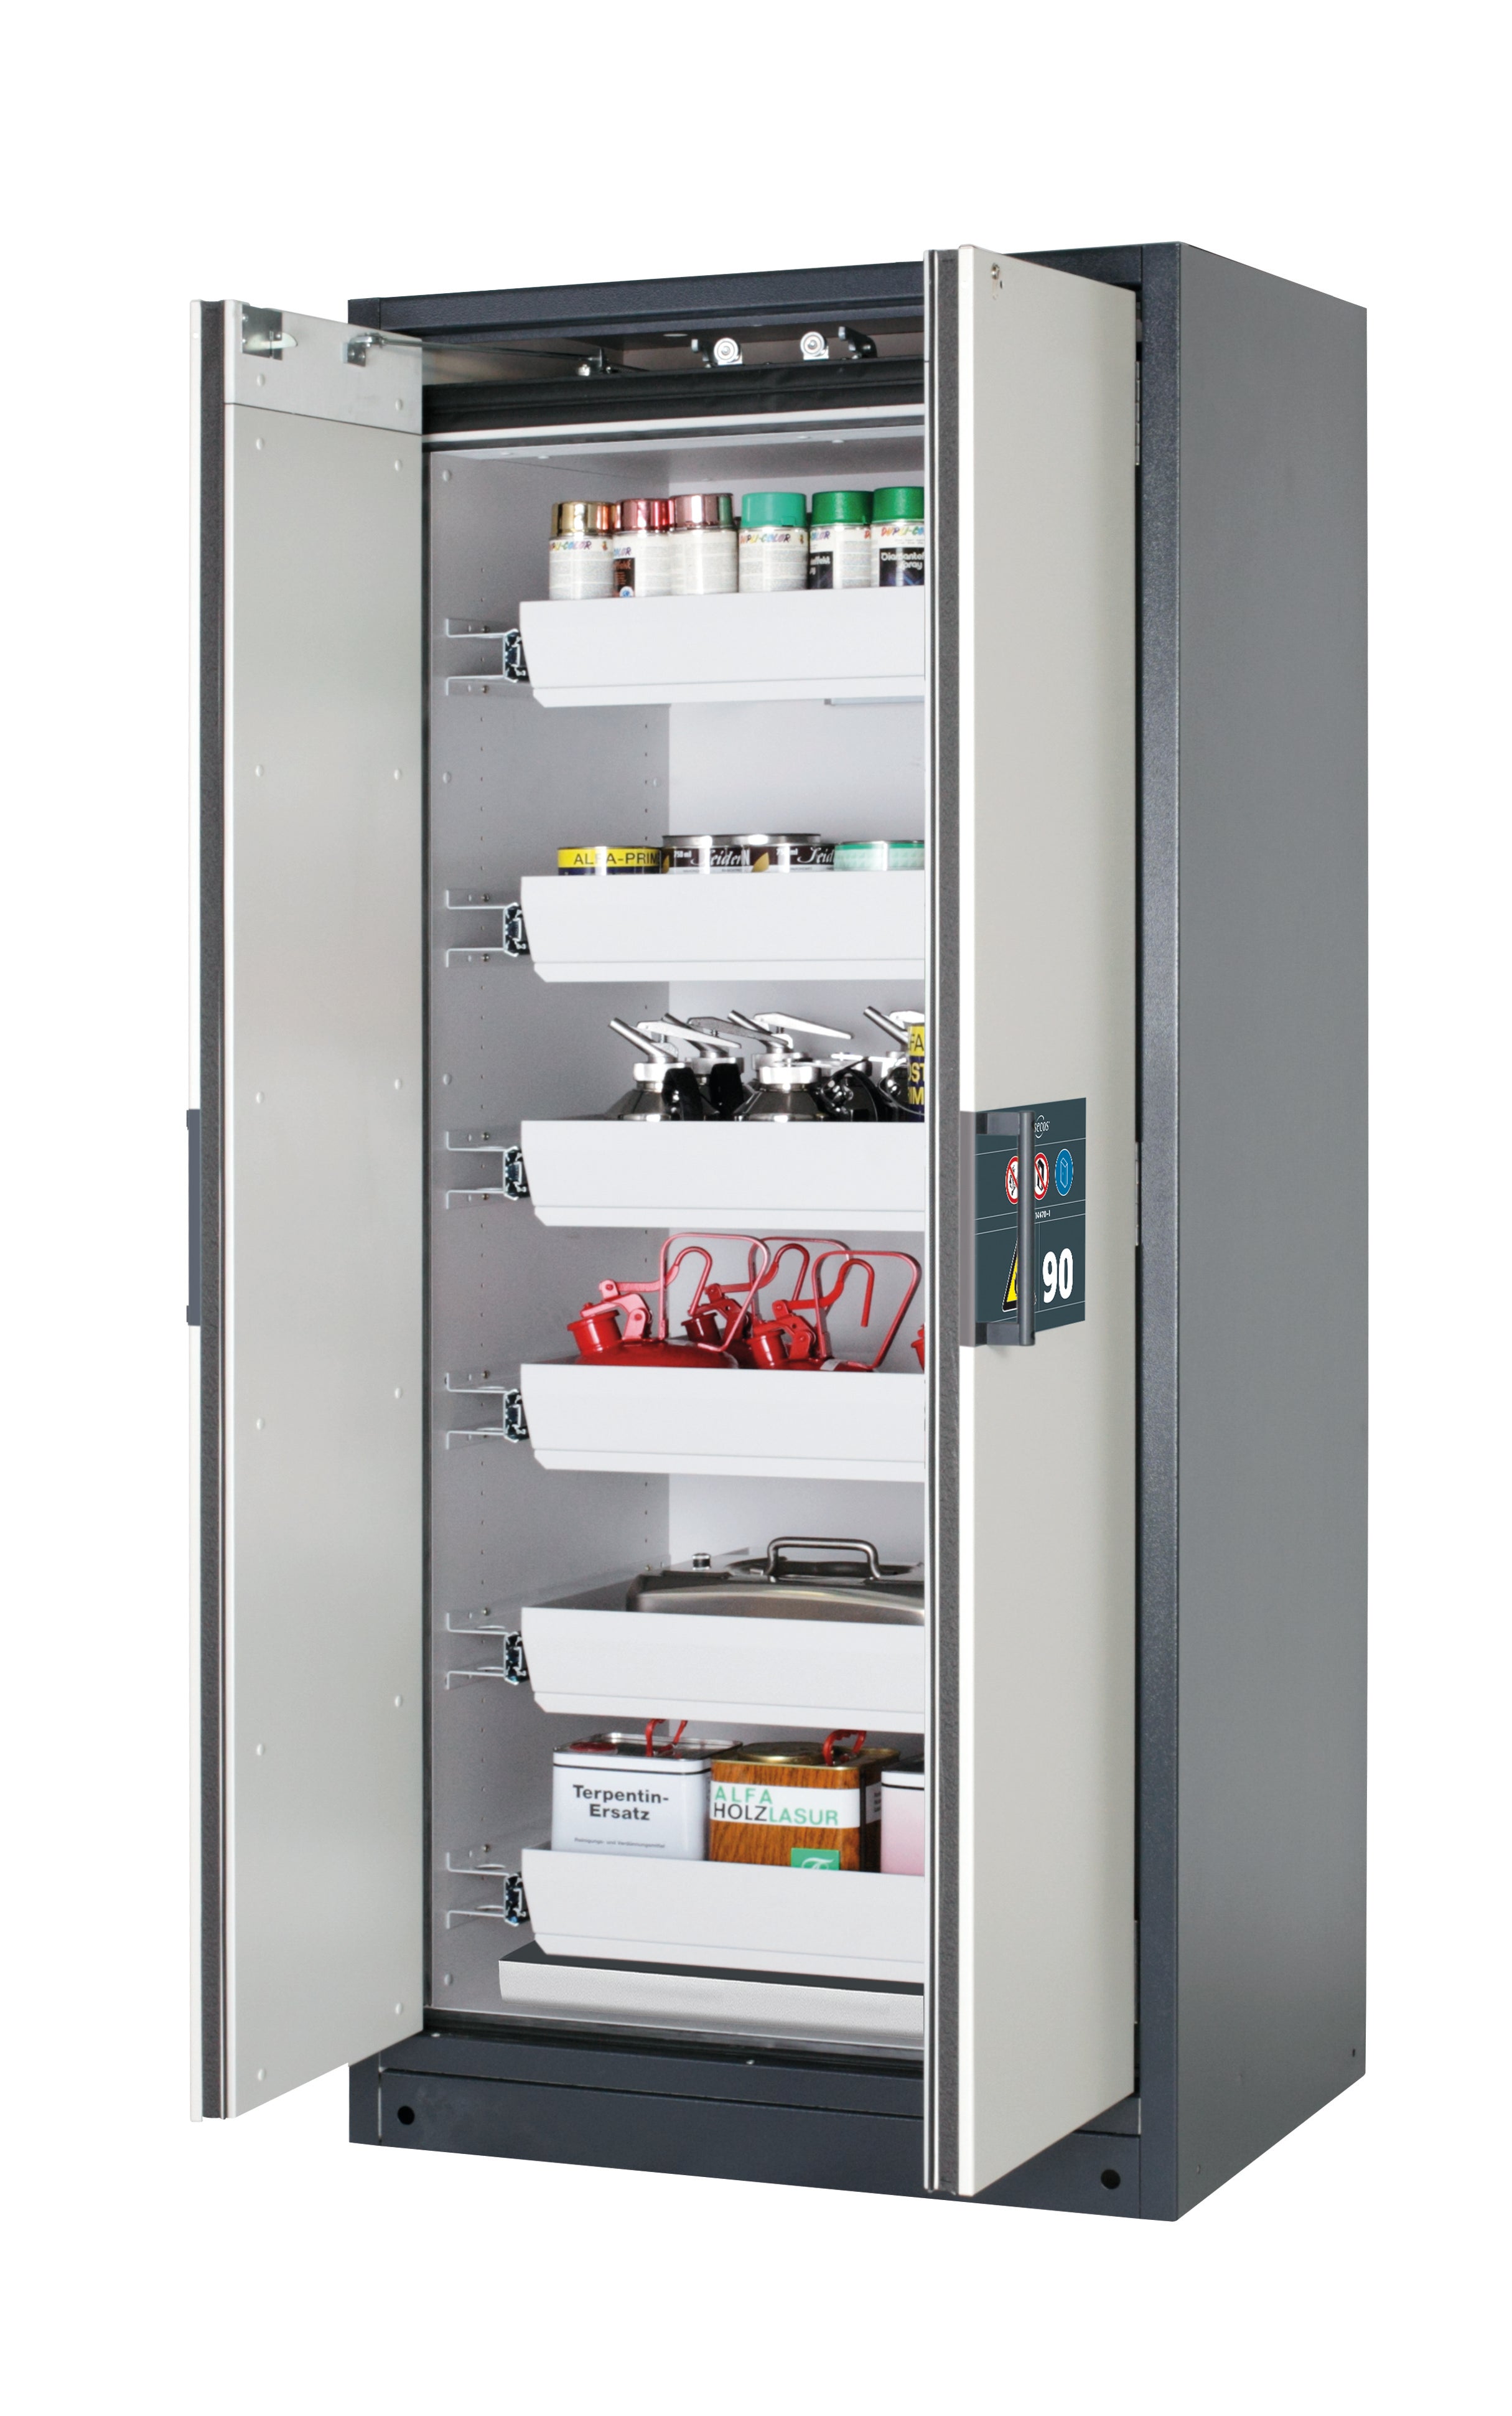 Type 90 safety storage cabinet Q-PEGASUS-90 model Q90.195.090.WDAC in light grey RAL 7035 with 6x drawer (standard) (sheet steel),